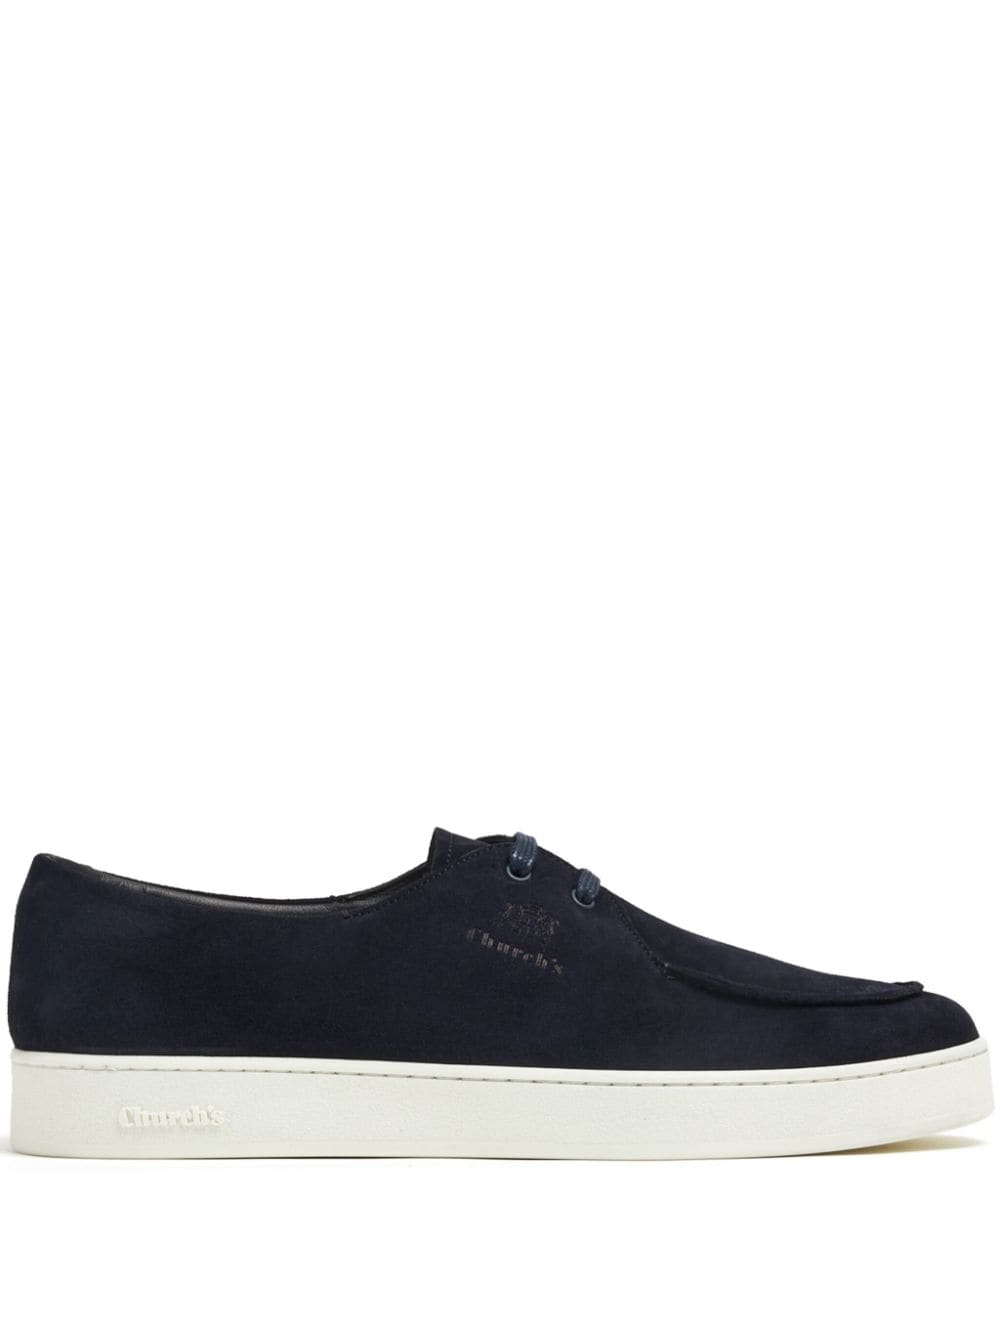 Image 1 of Church's Longsight 2 suede sneakers